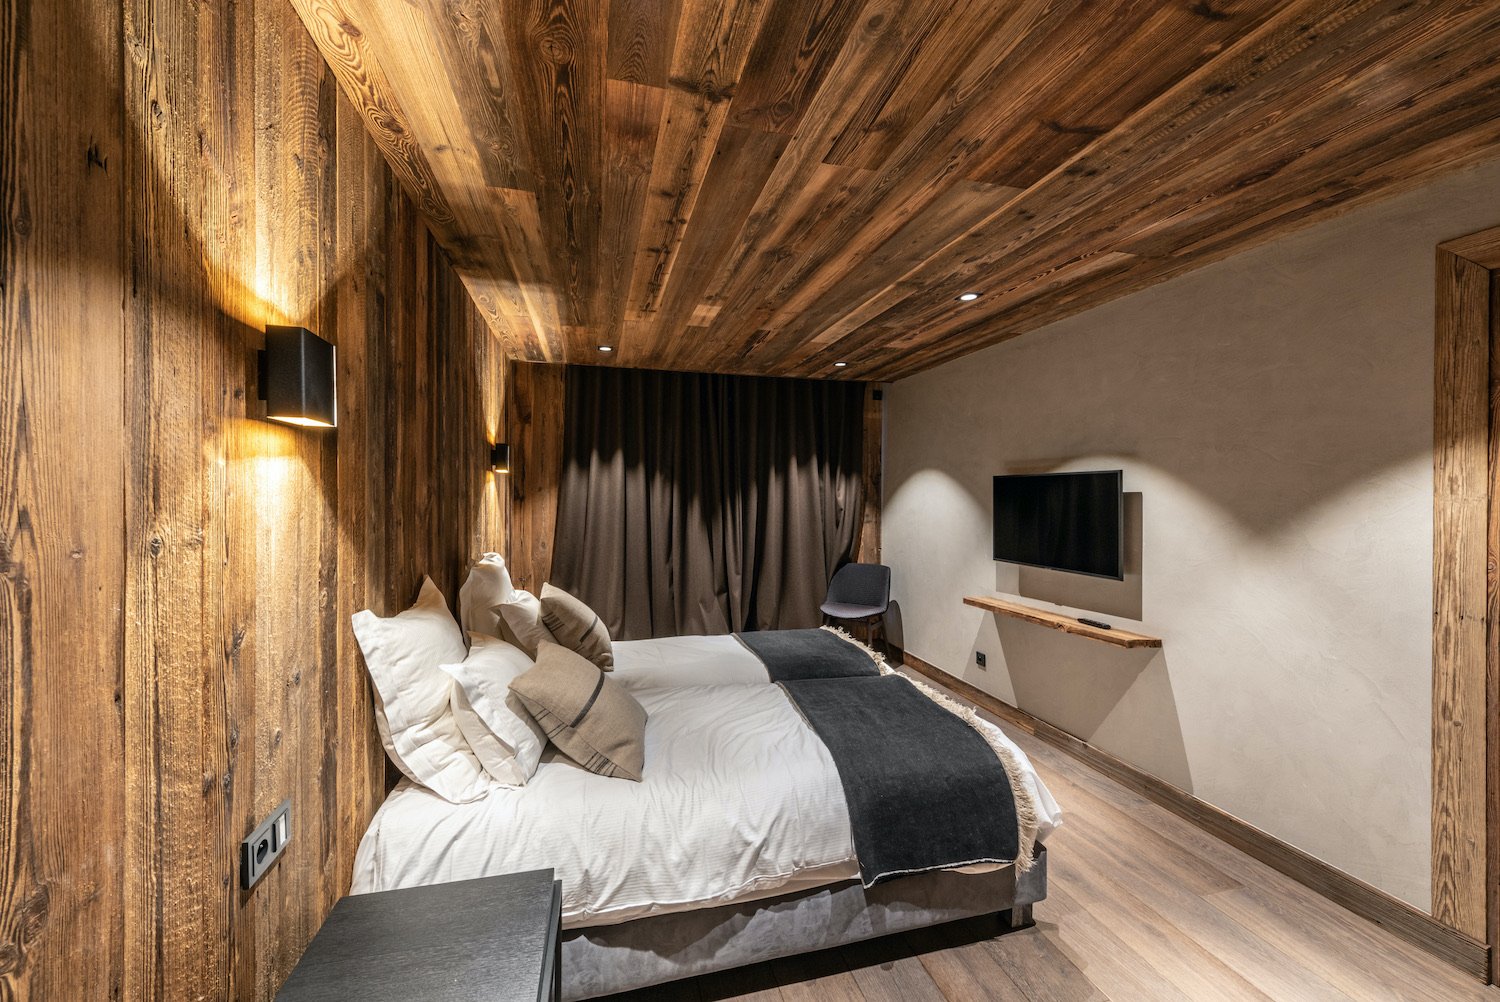 Prestigious chalet in La Clusaz for your seminar in the Alps at the foot of the slopes